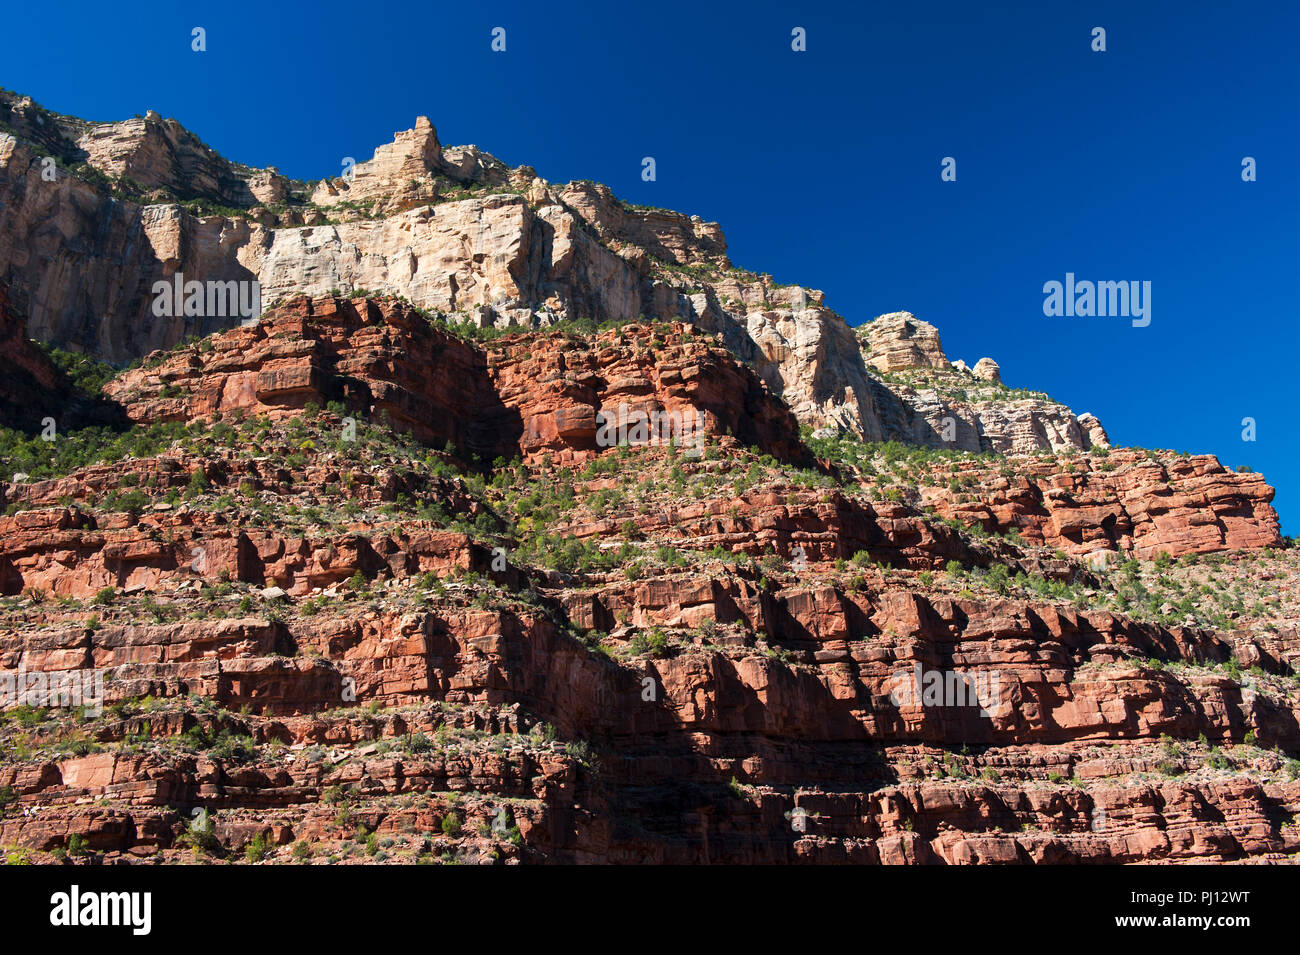 Cliffs made of sandstone and limestone seen from the Bright Angel trail, Grand Canyon, Arizona, USA. Stock Photo